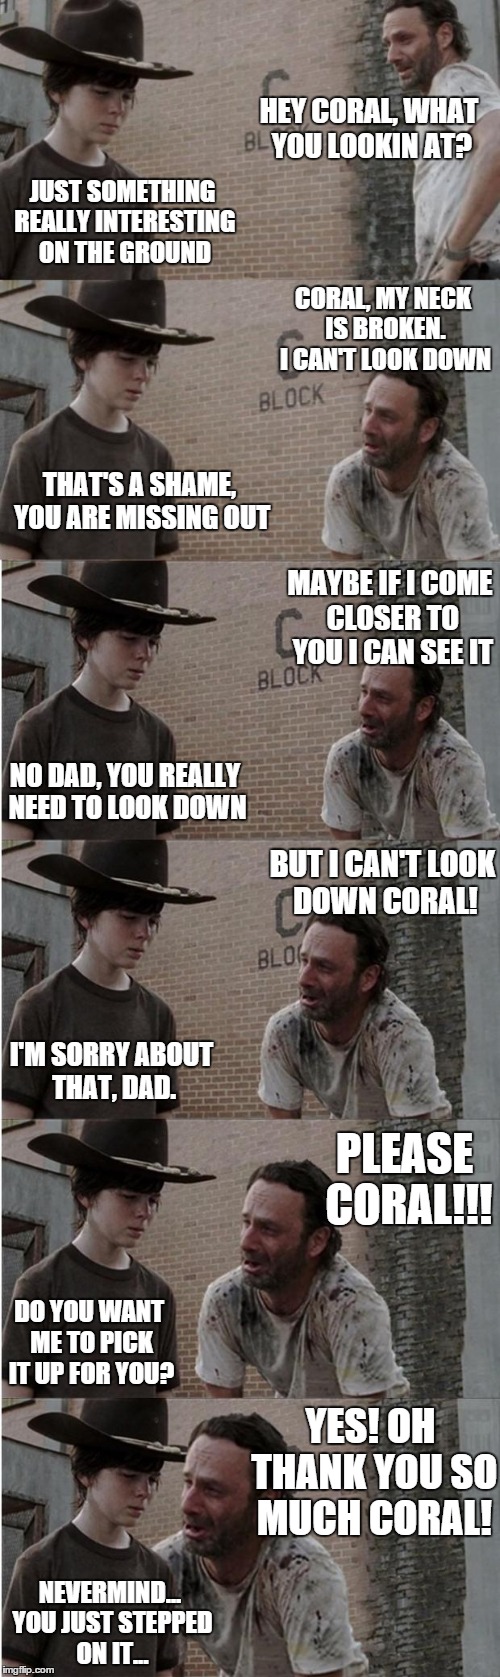 Rick and Carl Longer | HEY CORAL, WHAT YOU LOOKIN AT? NEVERMIND... YOU JUST STEPPED ON IT... JUST SOMETHING REALLY INTERESTING ON THE GROUND CORAL, MY NECK IS BROK | image tagged in memes,rick and carl longer | made w/ Imgflip meme maker